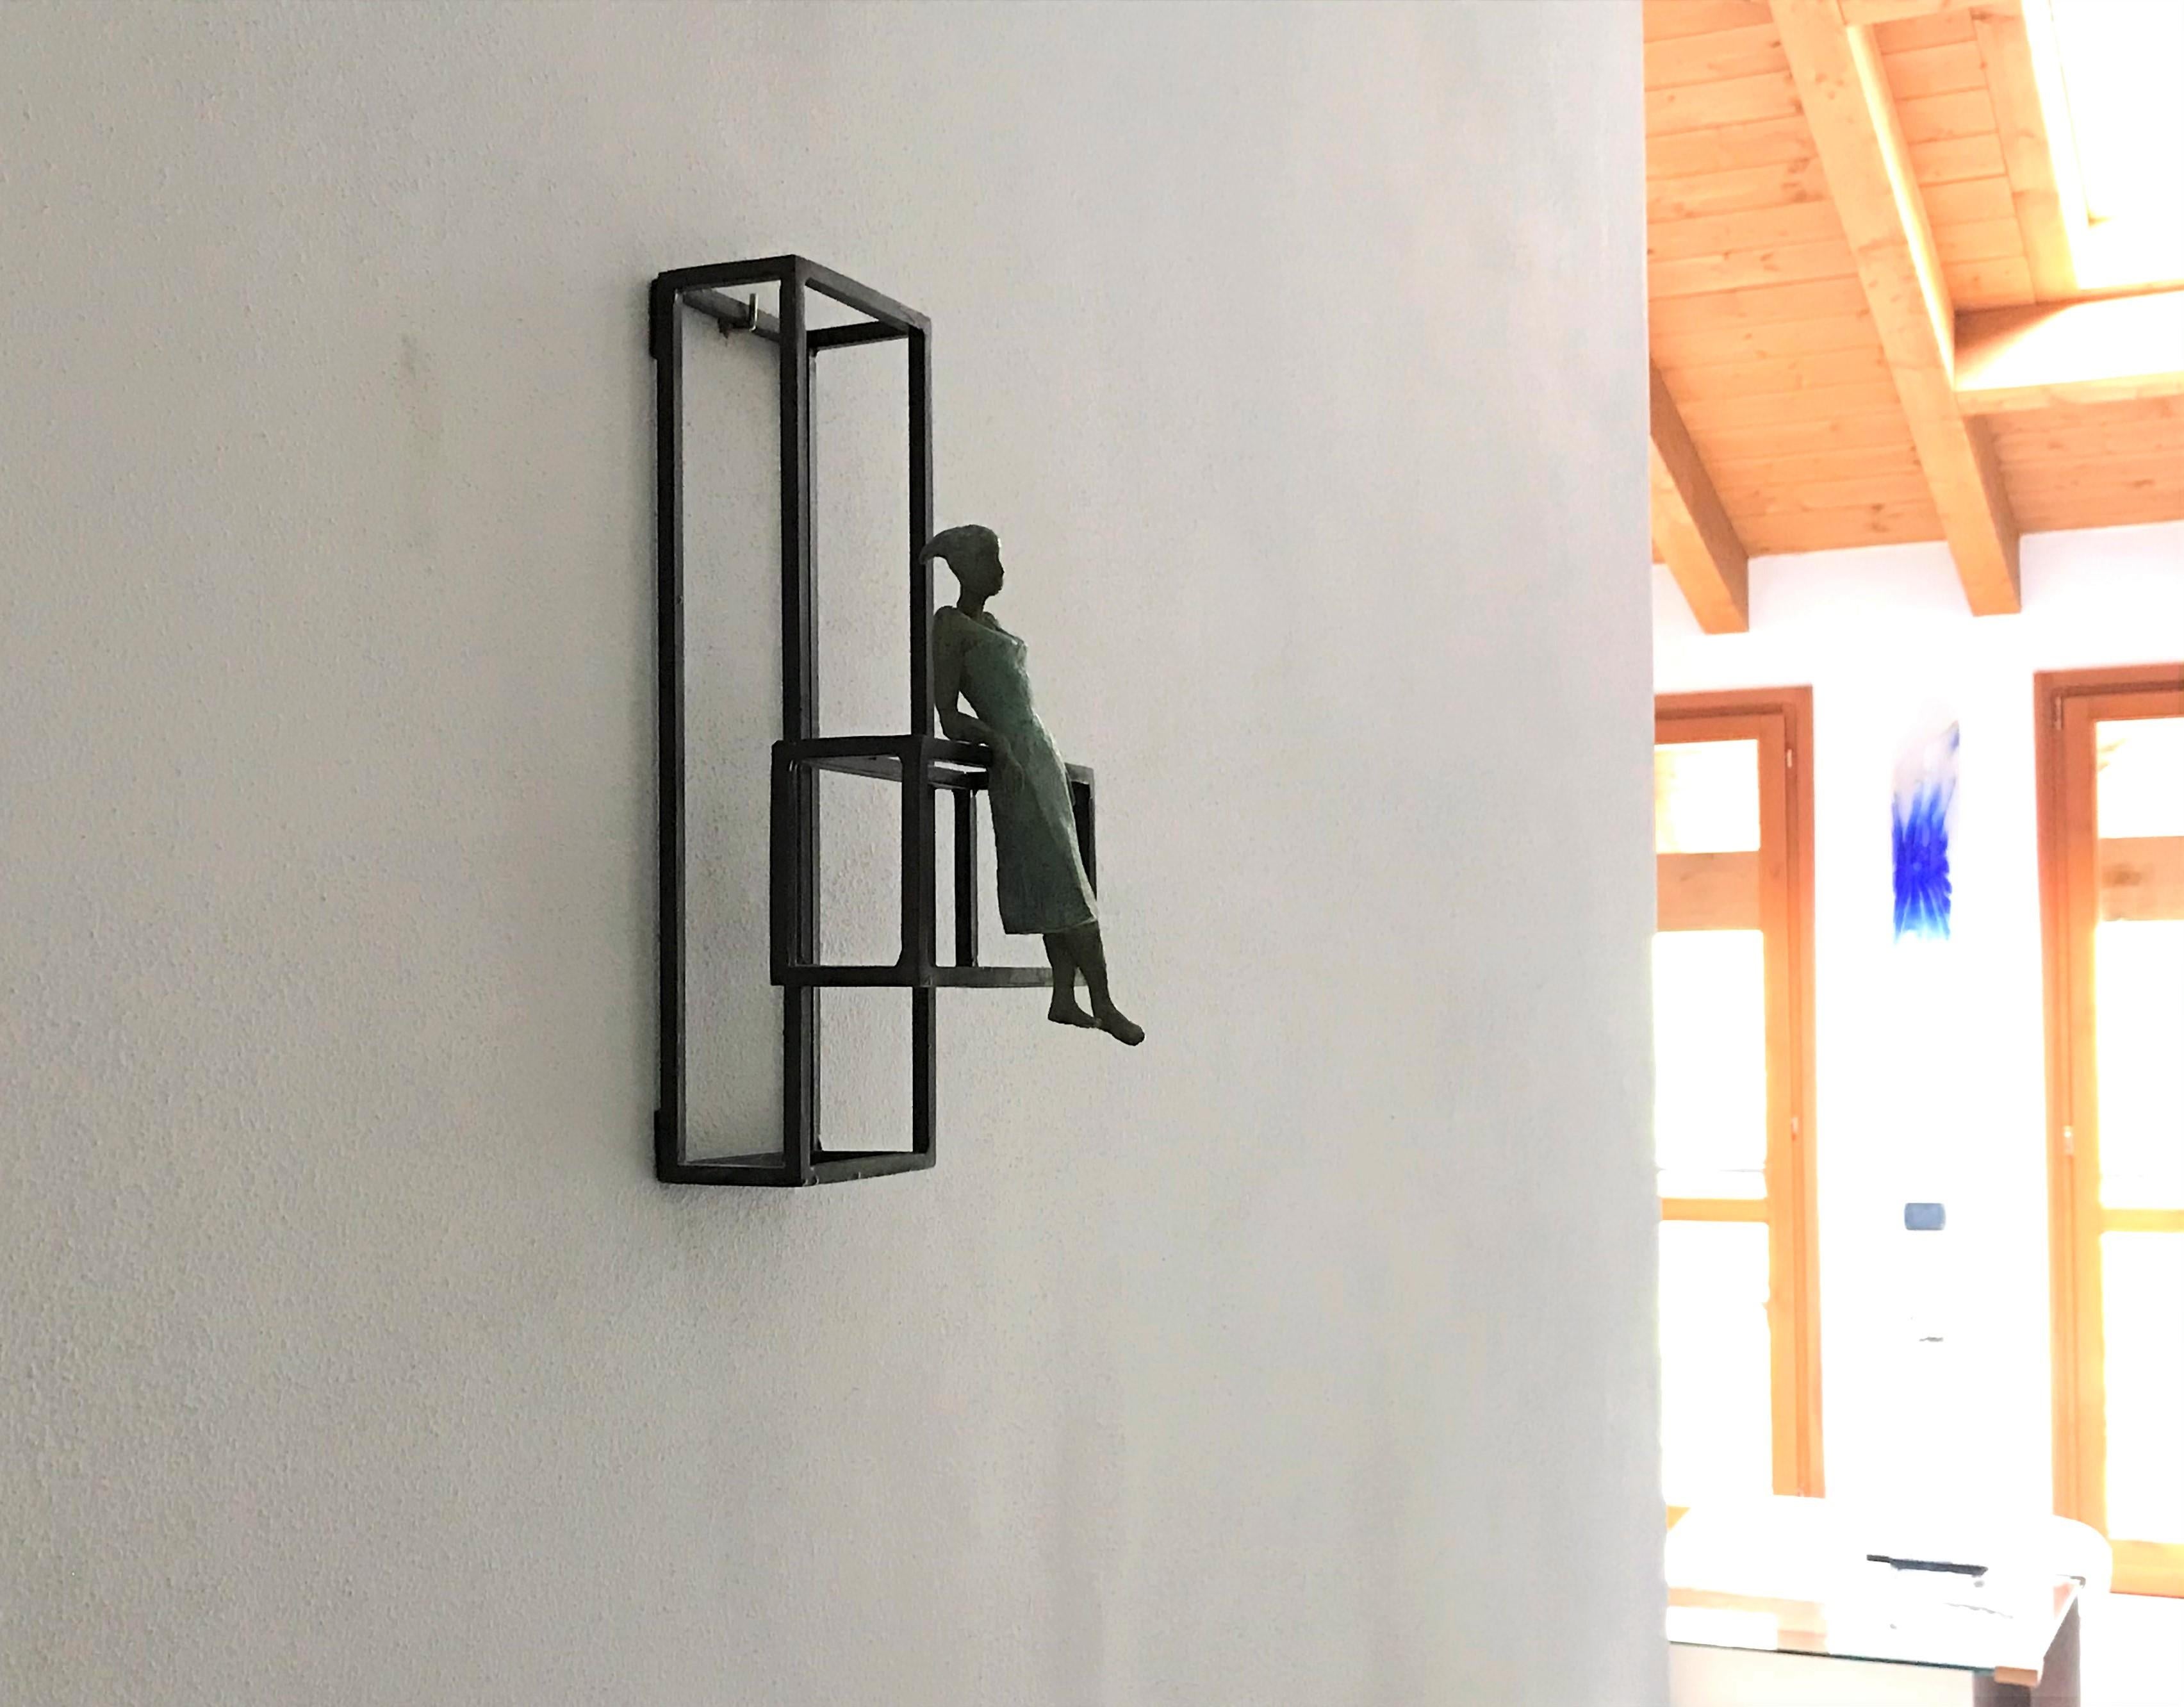 Floating is a bronze sculpture with green patina, it is connected to a steel base. The edition size is 50. This is a mural sculpture ( be hung on wall ONLY). Joan captures the mood of a girl enjoying moment of freedom and time with herself. 

Joan’s